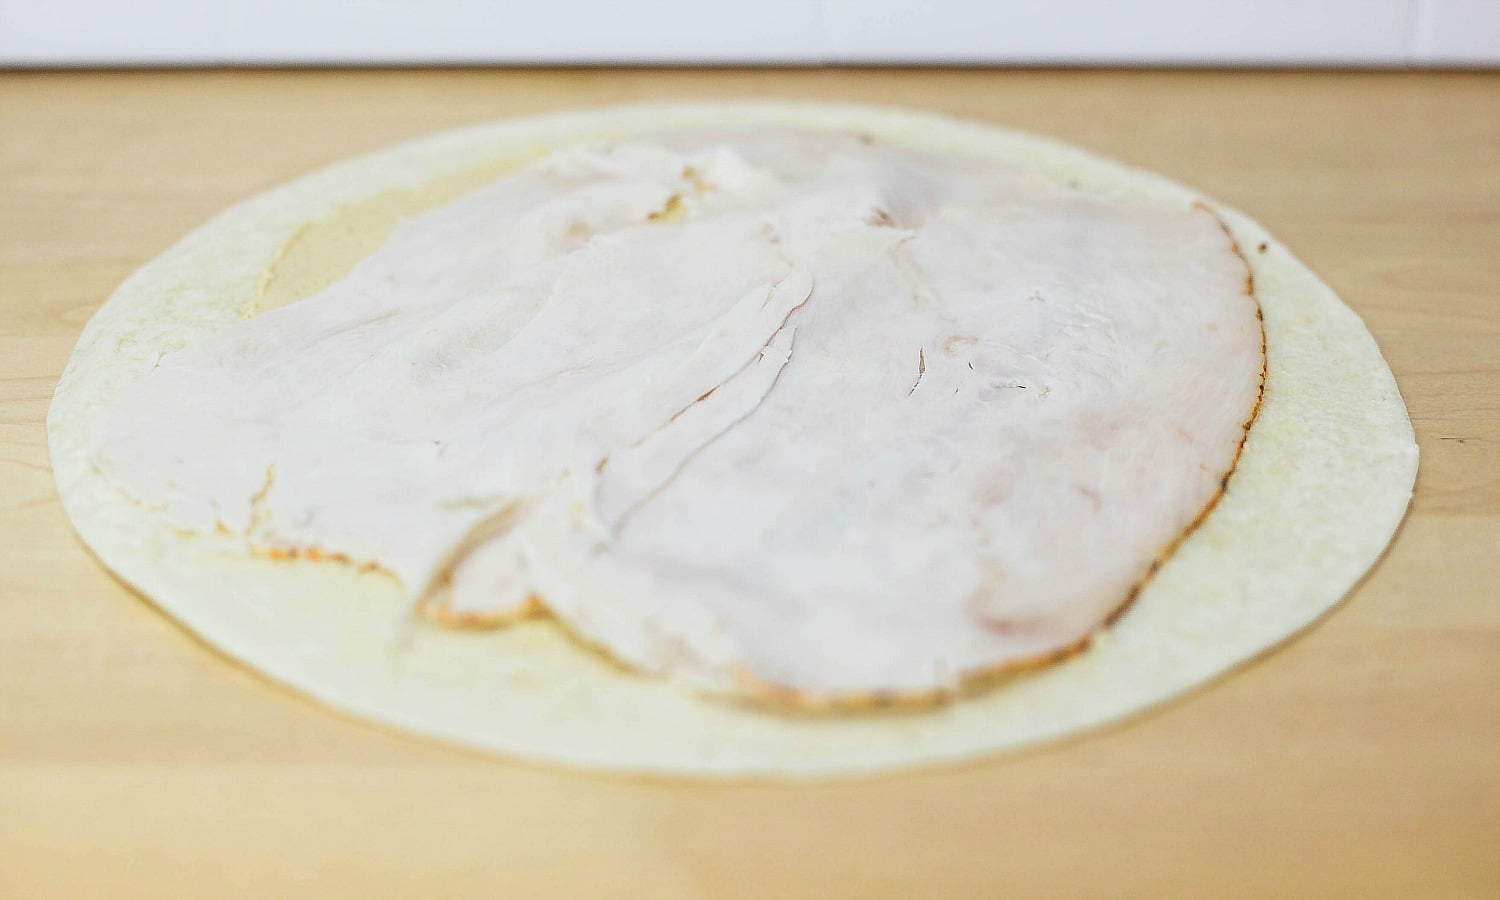 Layer thin slices of turkey on top of the hummus for your make-ahead wrap. 